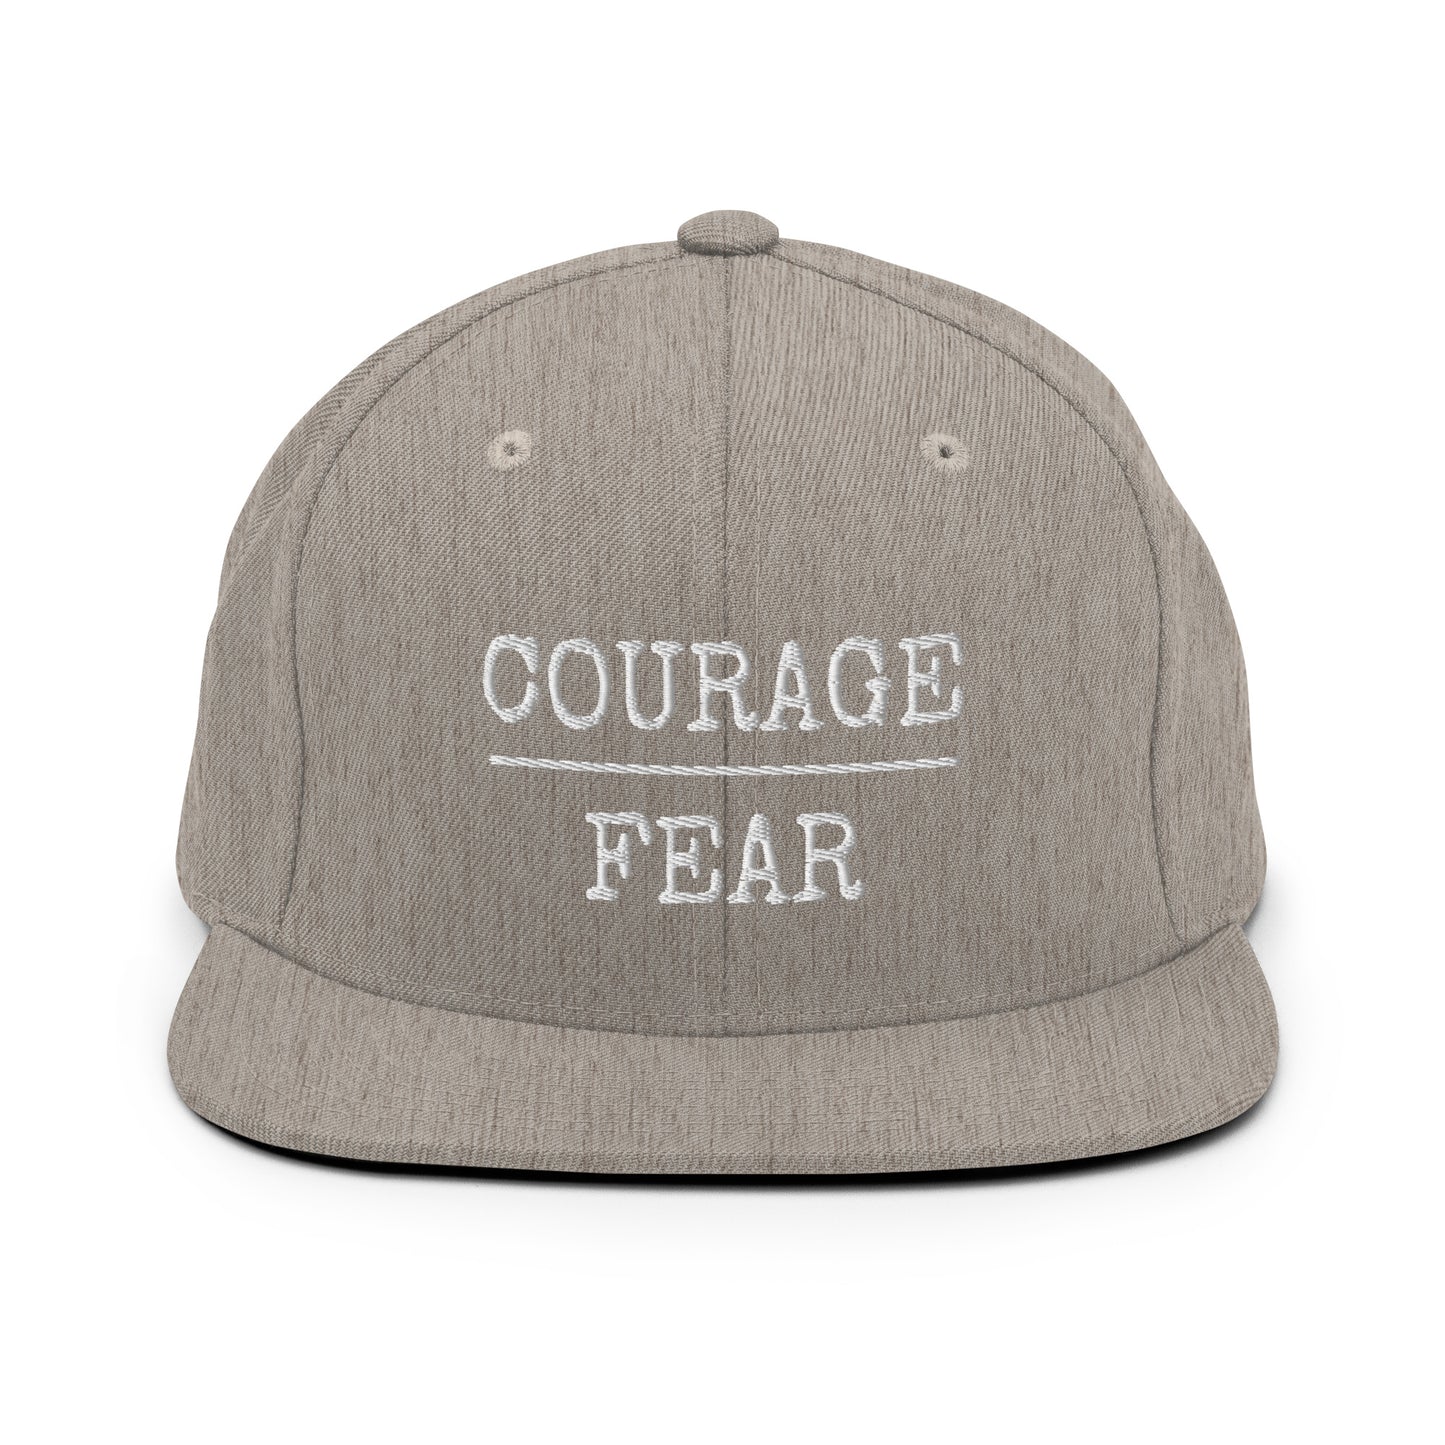 COURAGE/FEAR Snapback Hat